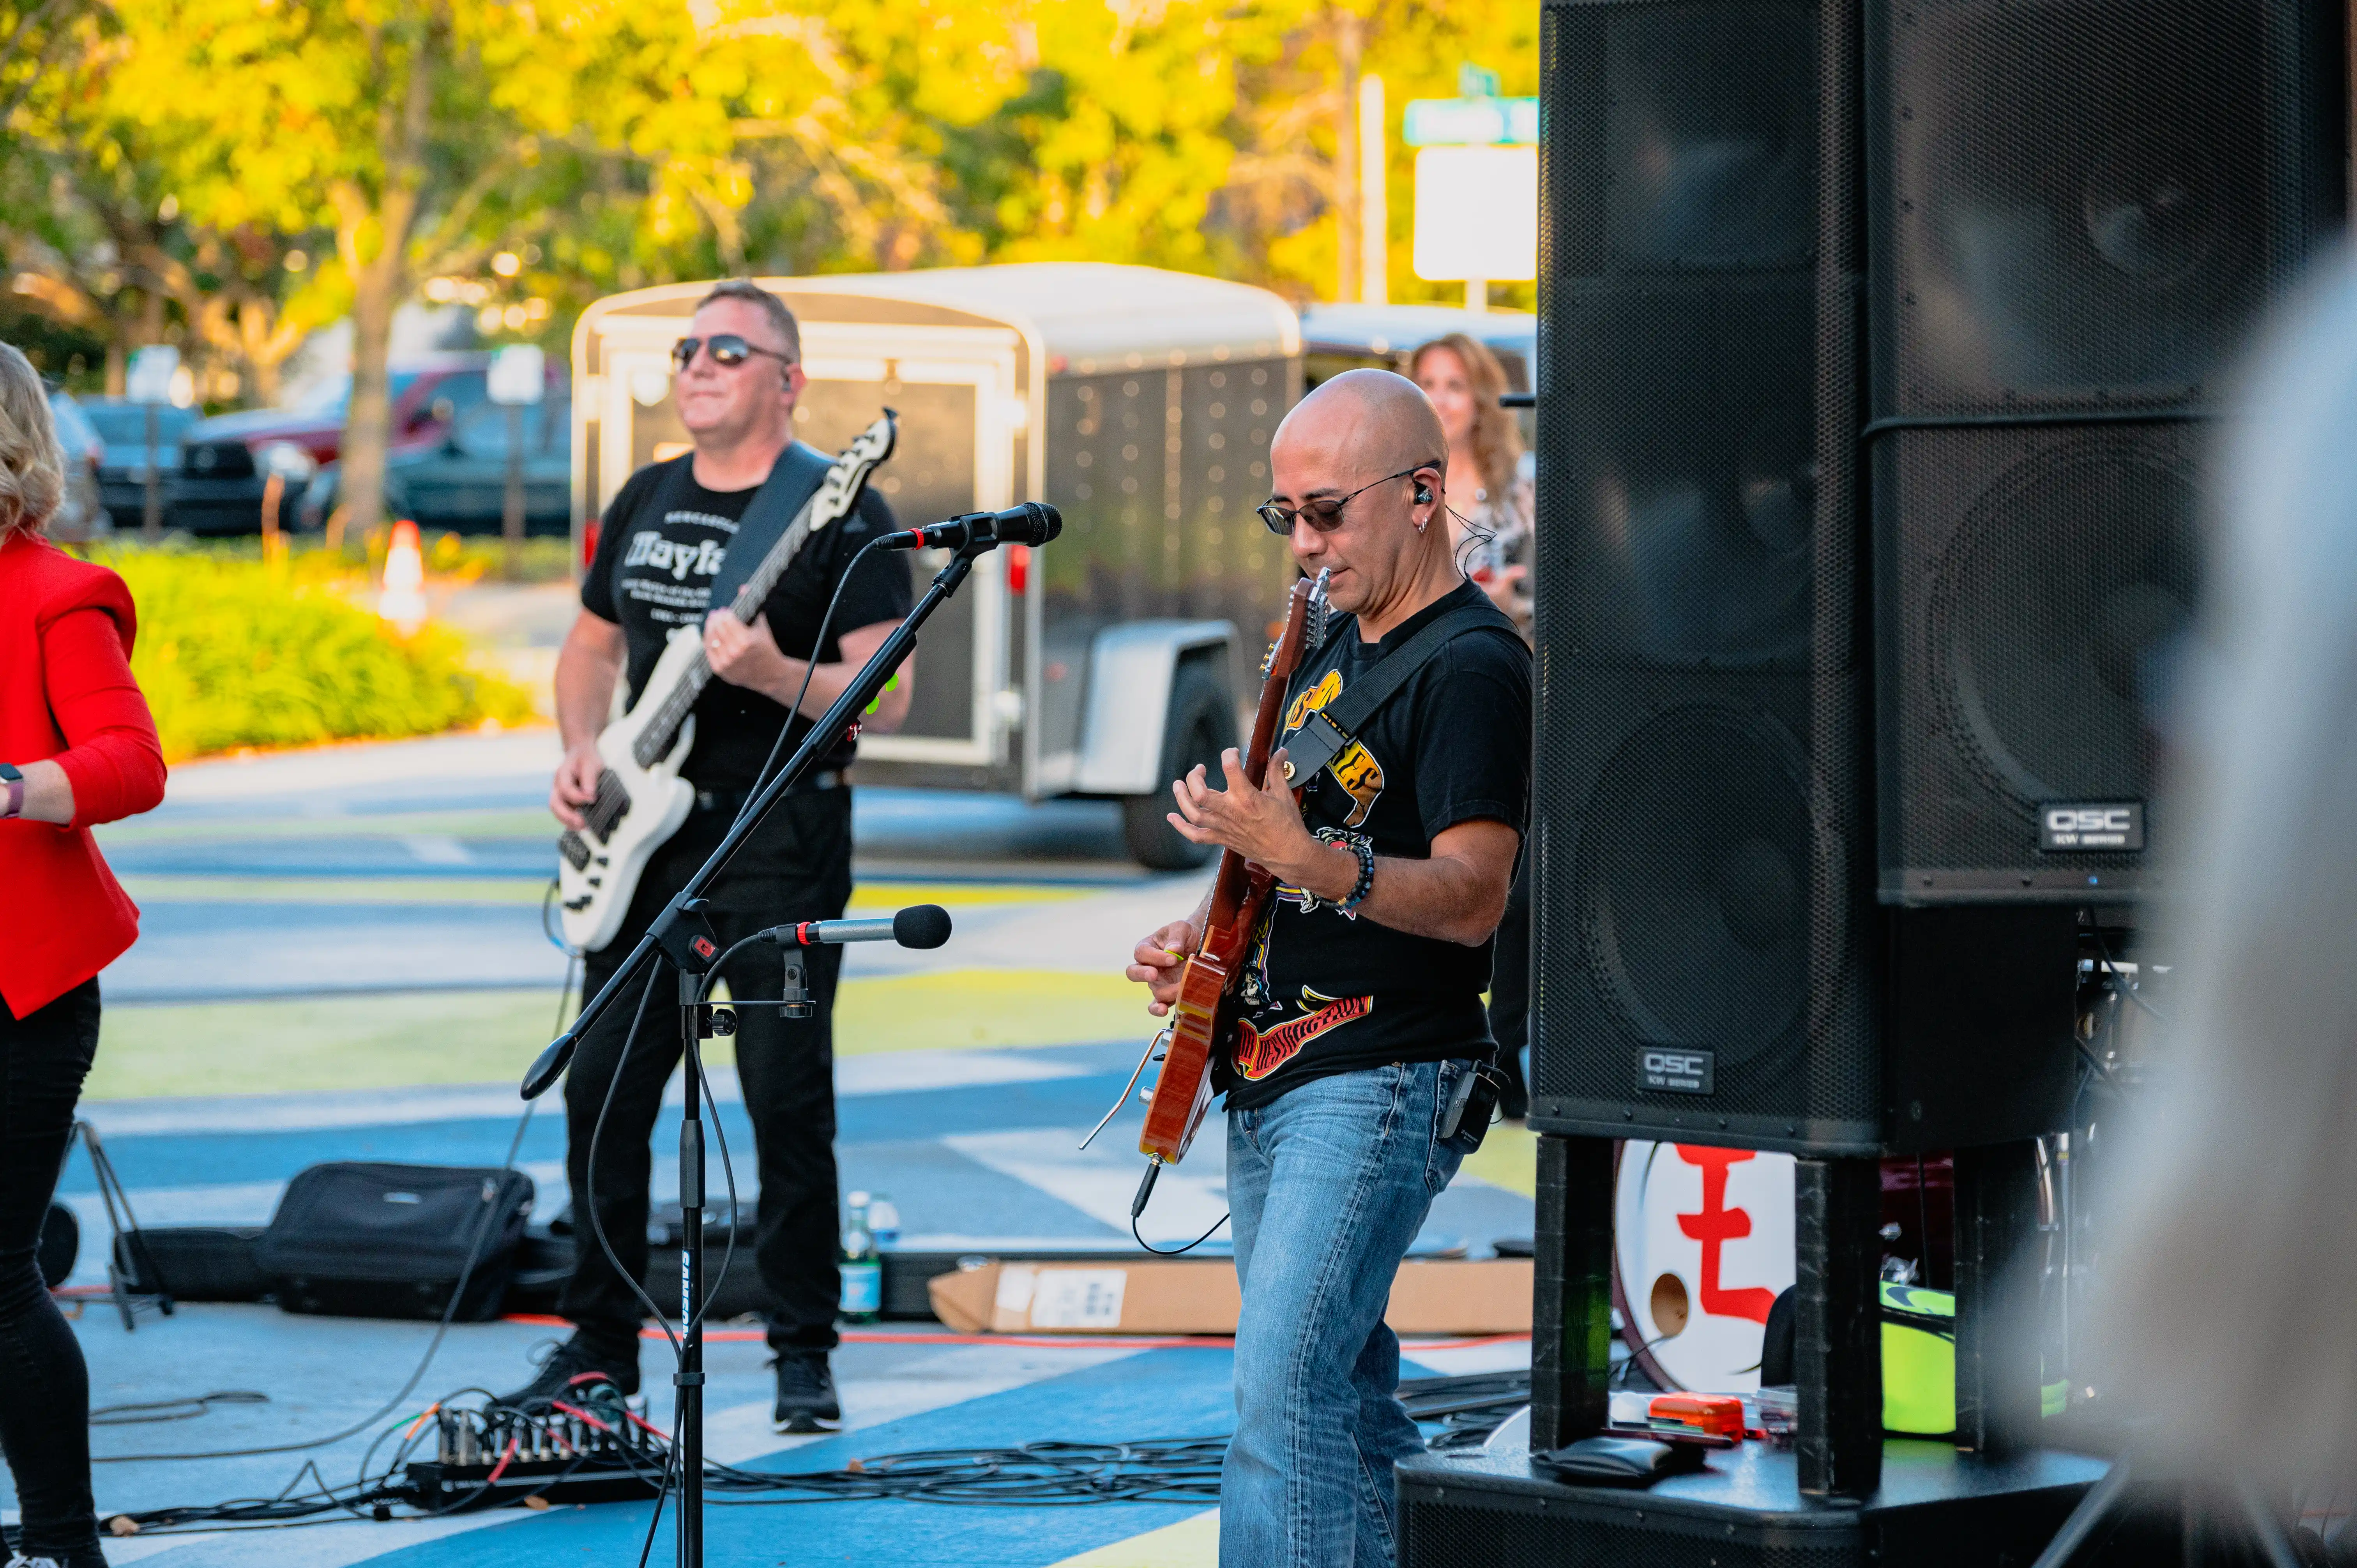 Band members performing at an outdoor event, with focus on a guitarist playing an electric guitar.